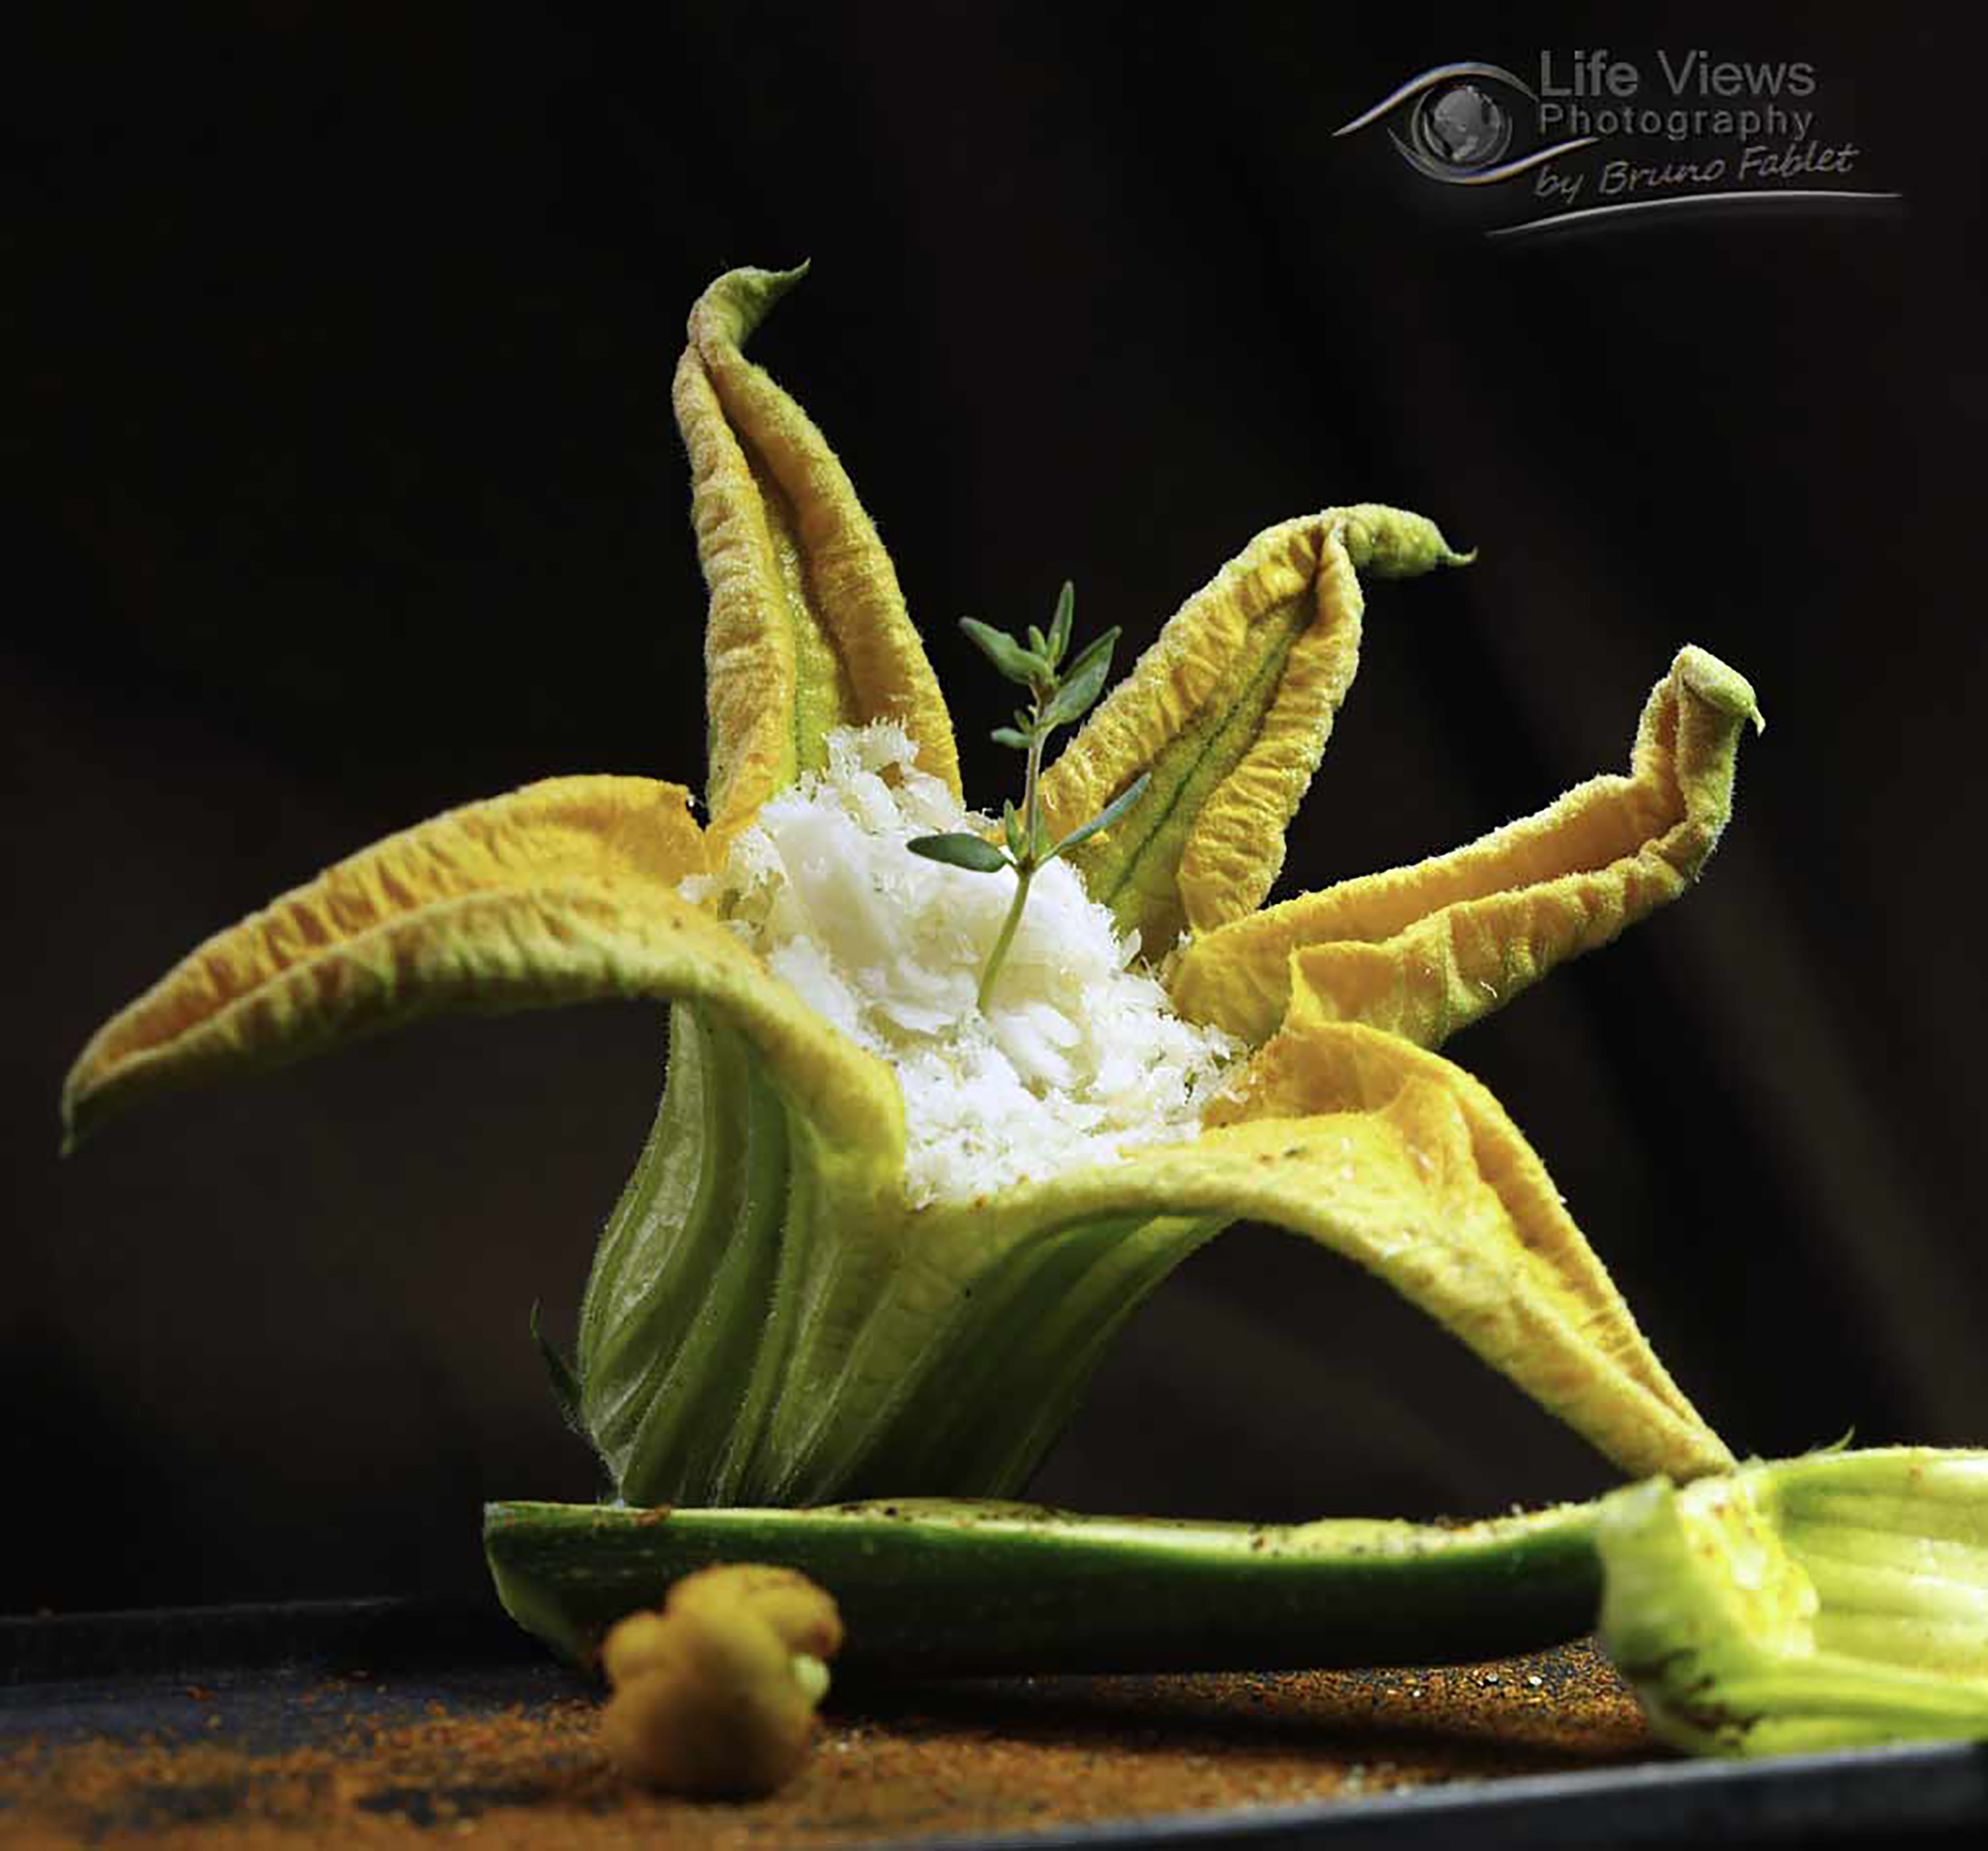 Photographie culinaire Life Views